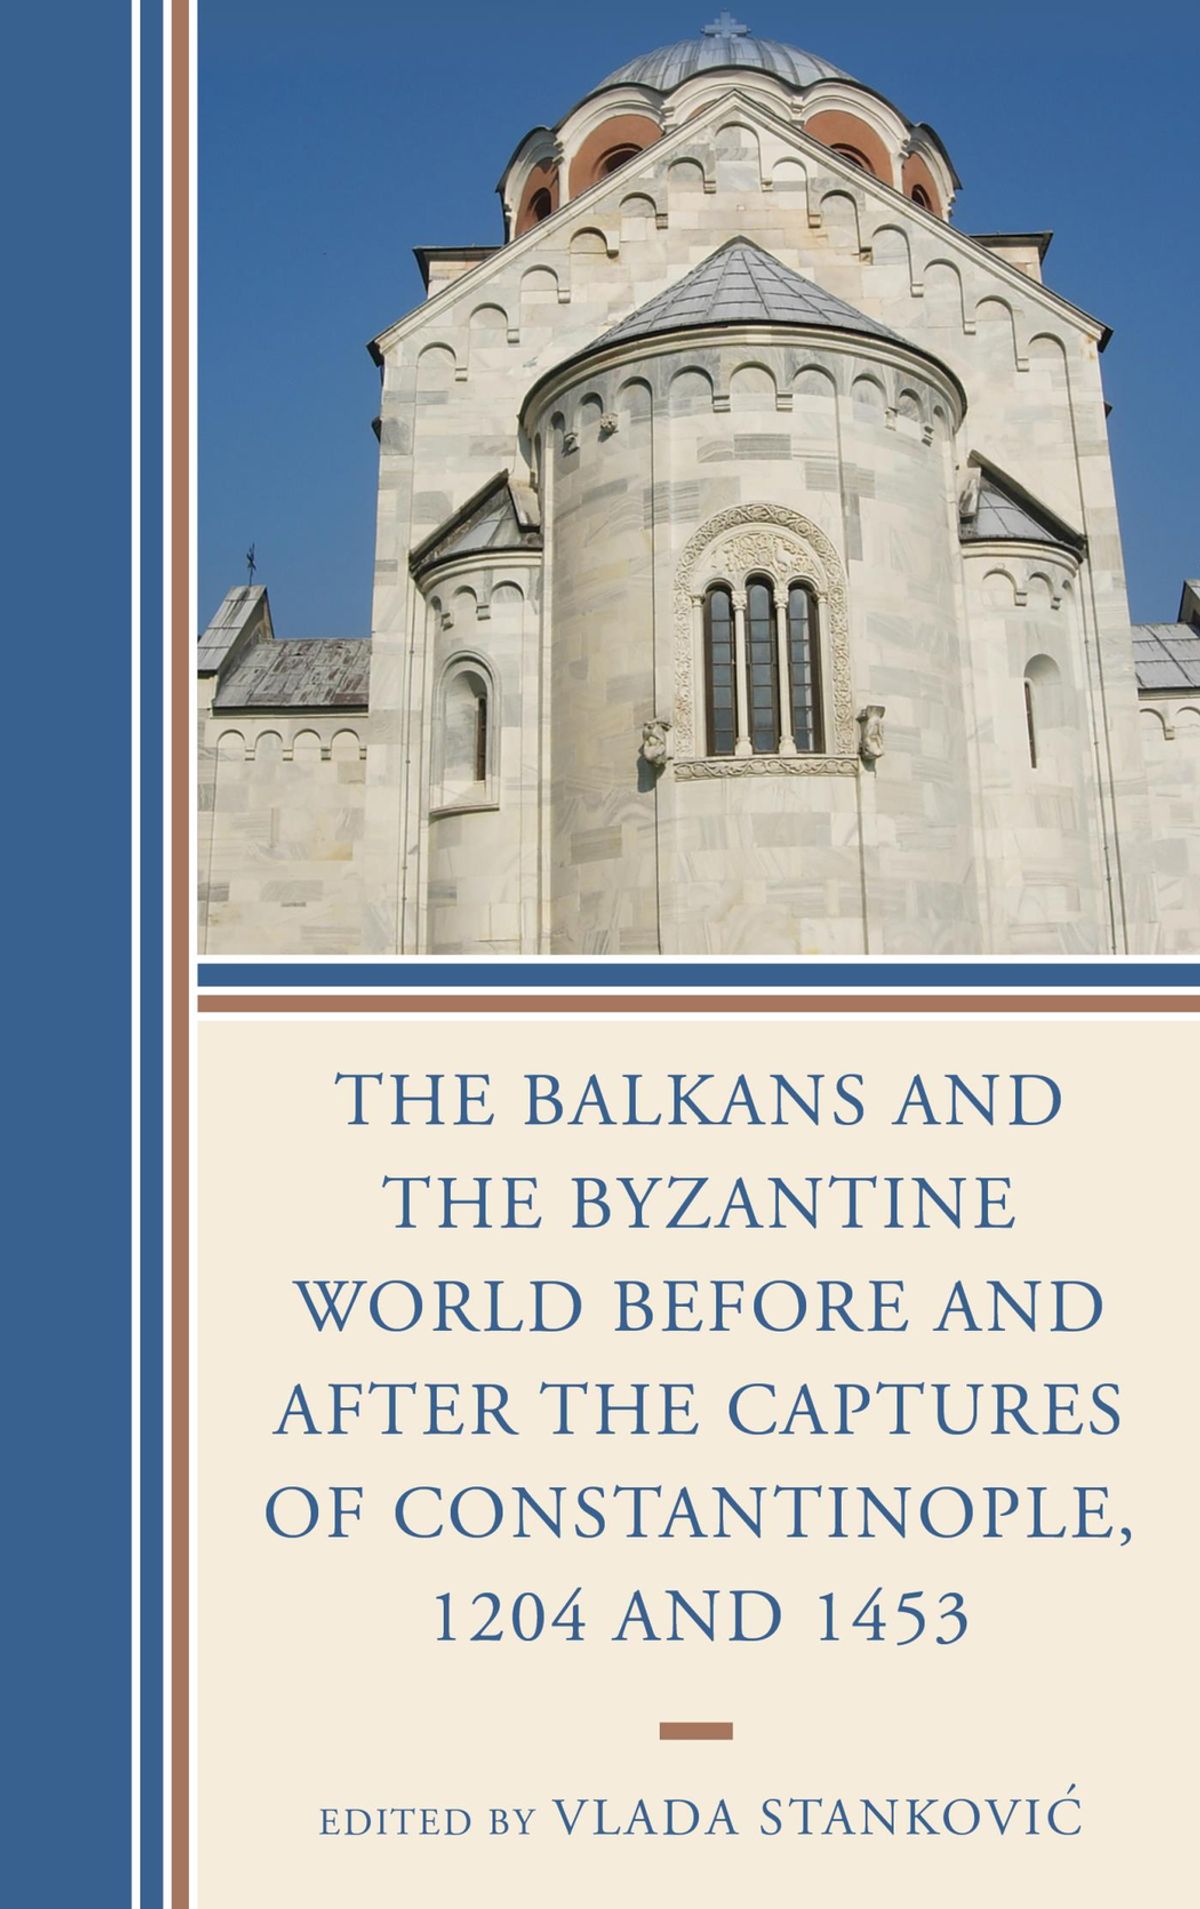 Review of V. Stanković, ed., <i>The Balkans and the Byzantine World before and after the Captures of Constantinople, 1204 and 1453</i>  (Lanham: Lexington Books, 2016), in <i>Parergon</i> 35, no. 2 (2018): 235-236. [J. H. Johnson]